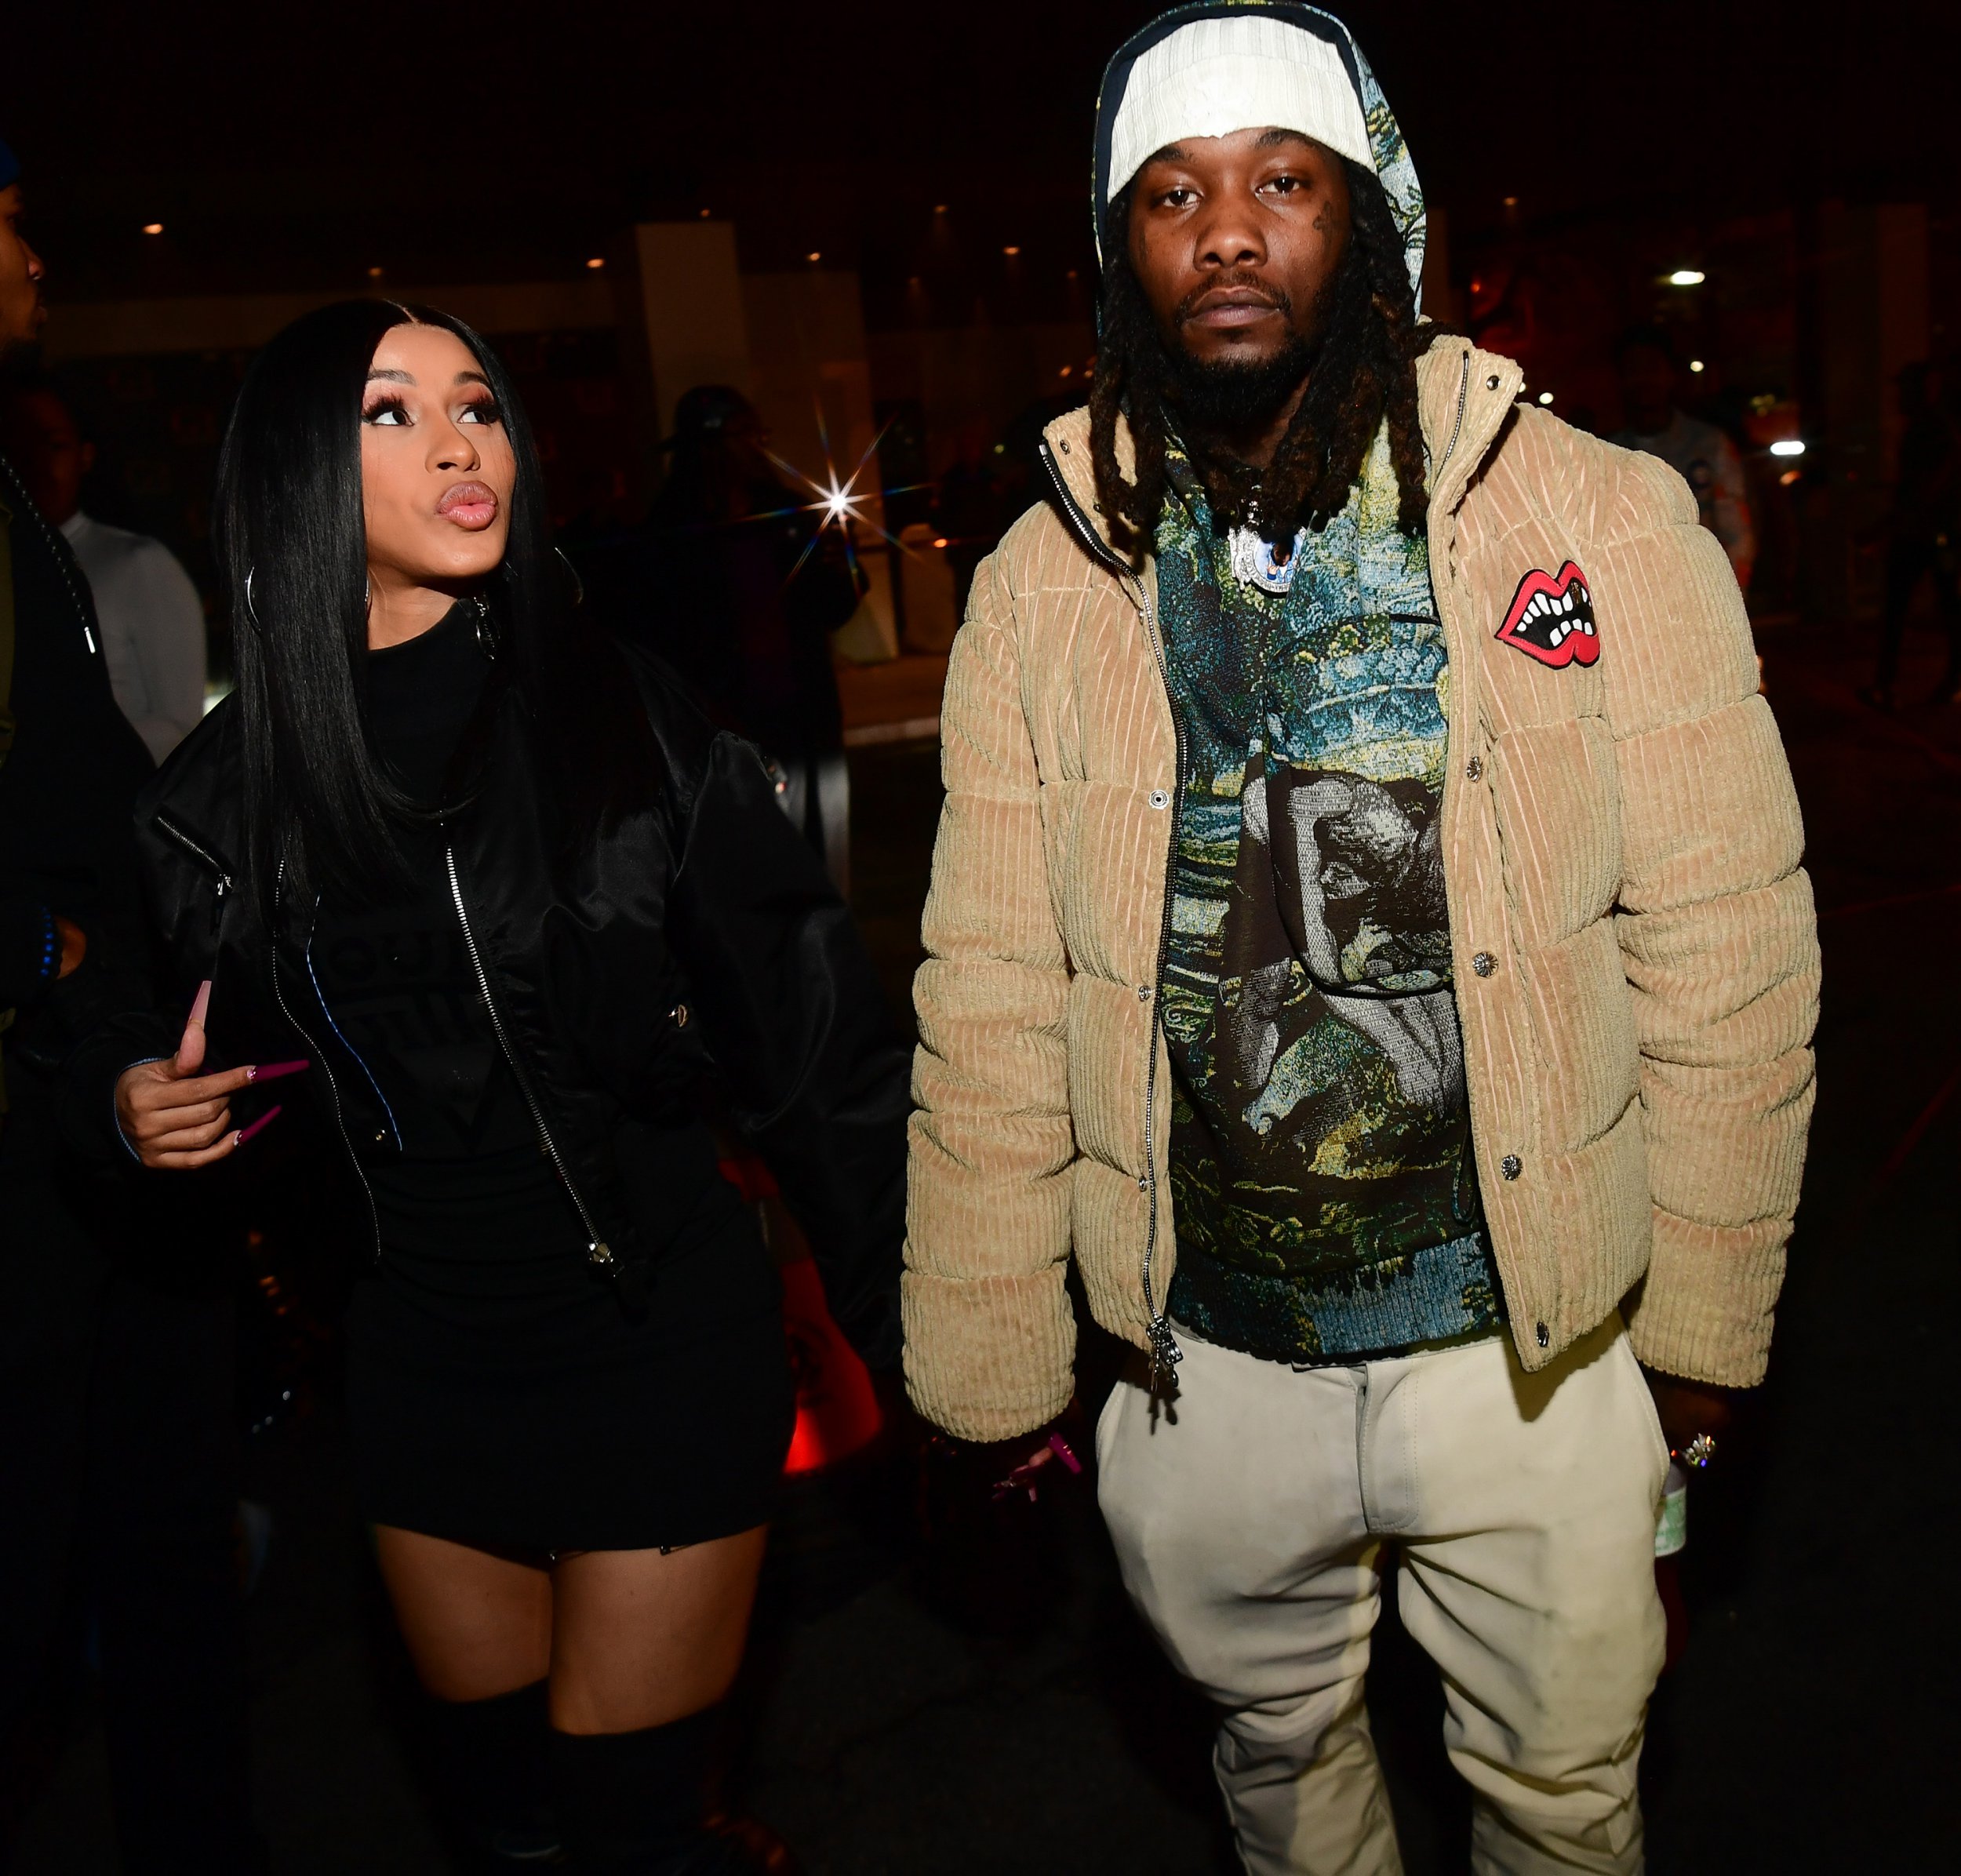 On Thursday, it was announced that Cardi B had filed for divorce from her husband of seven years